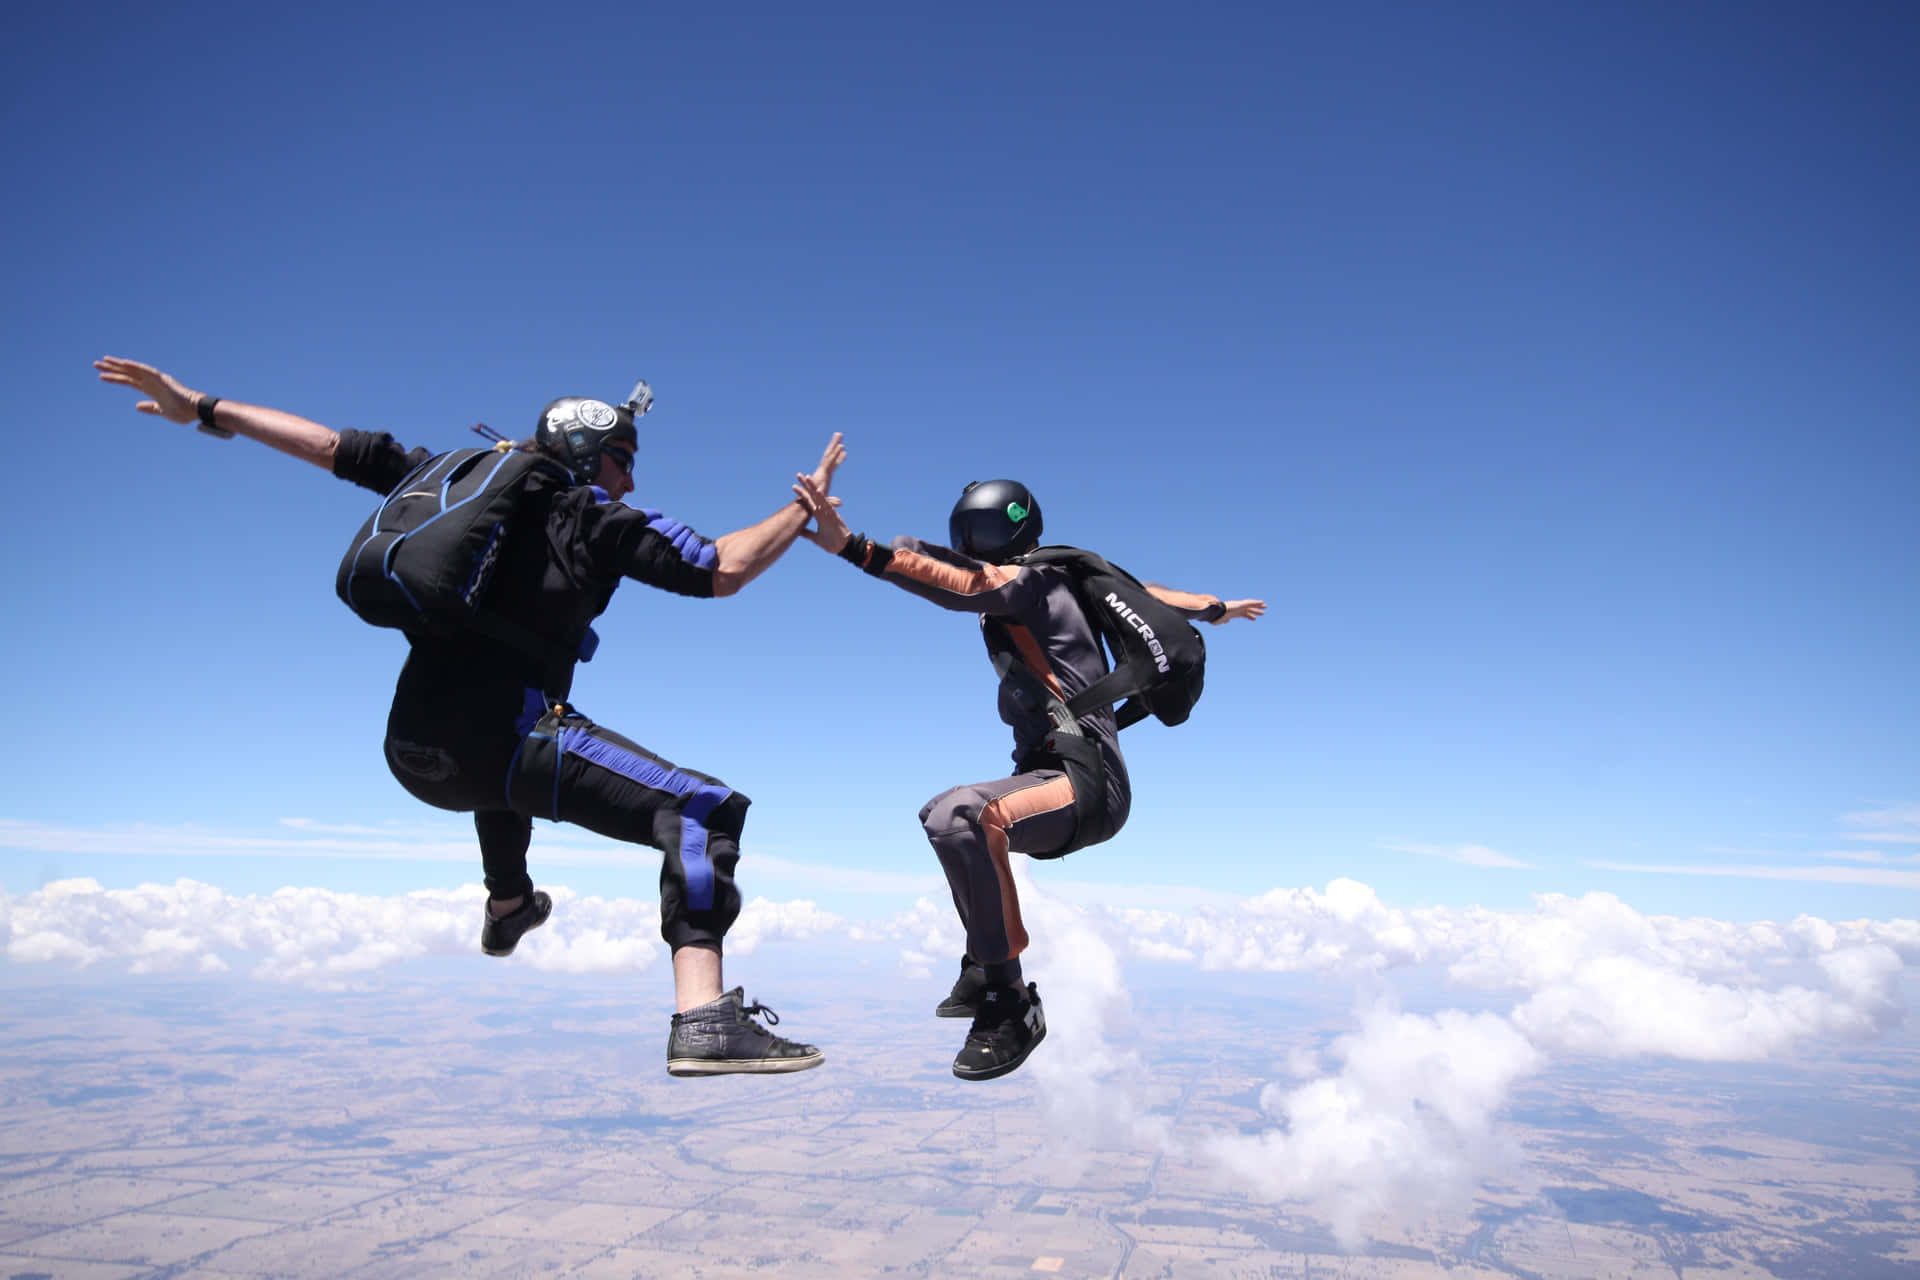 Caption: High-Five in the Sky - Skydiving Adventure Wallpaper